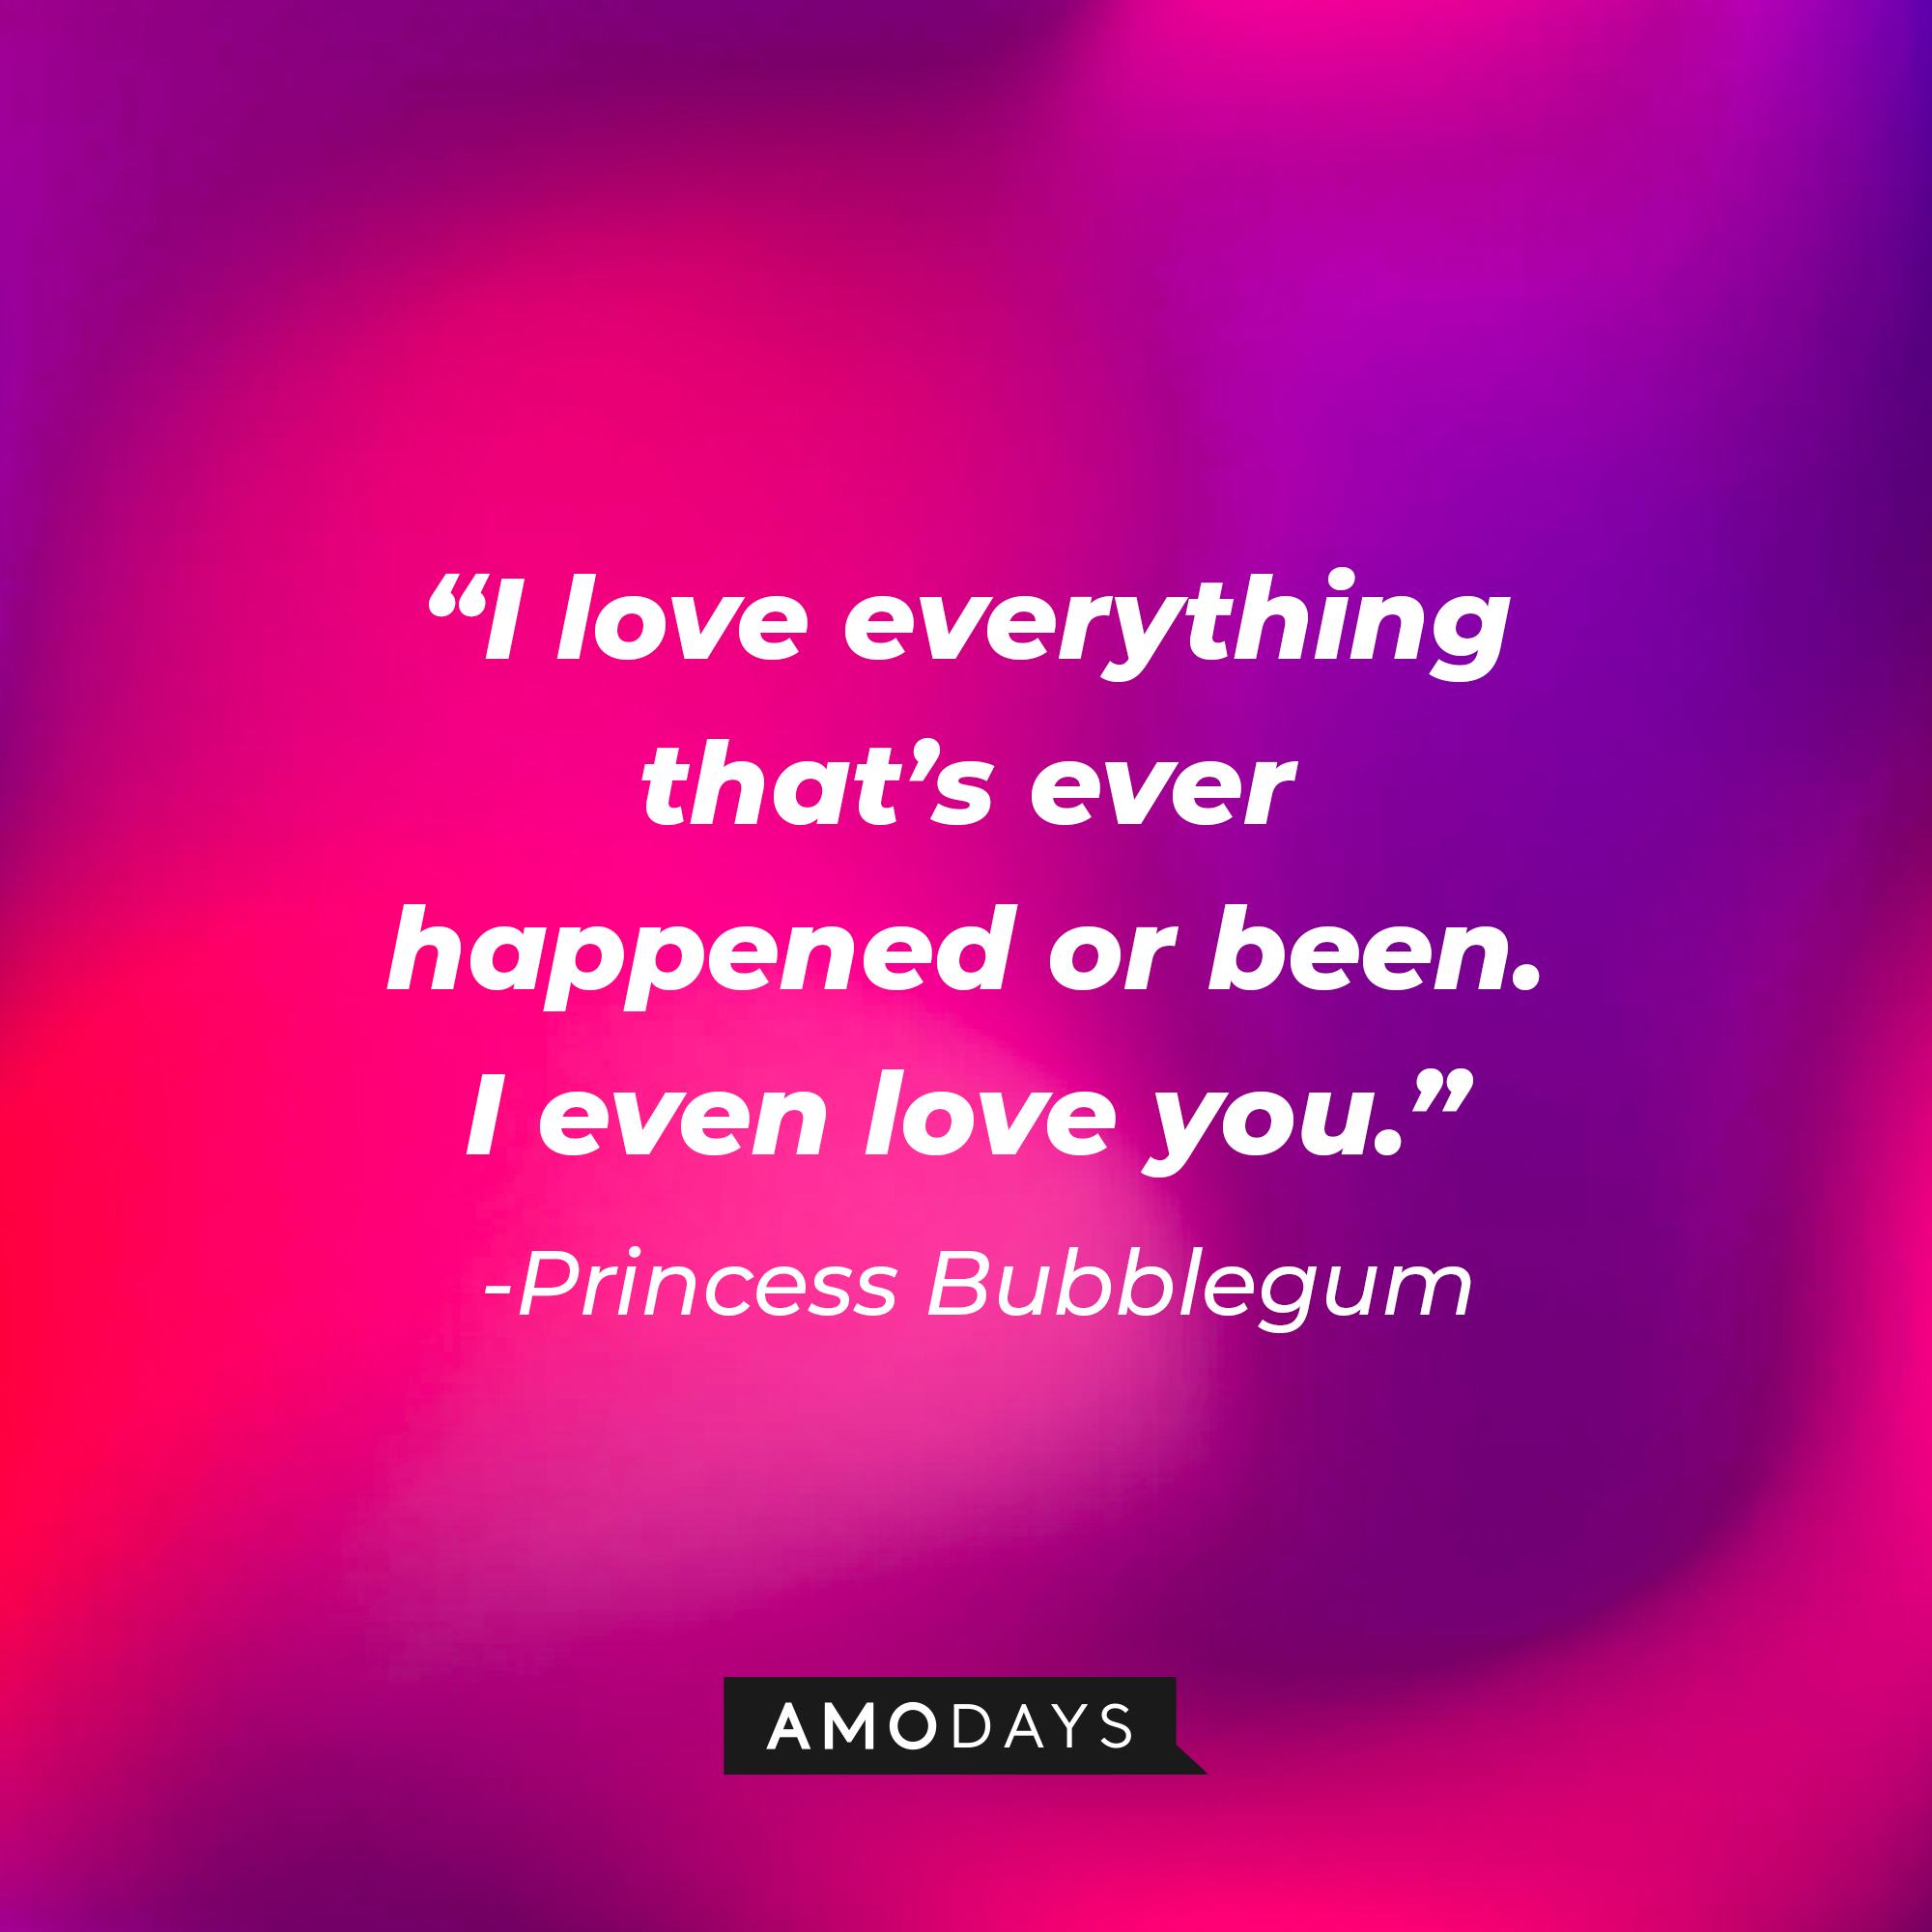 Princess Bubblegum’s quote: “I love everything that’s ever happened or been. I even love you.”  | Source: AmoDays